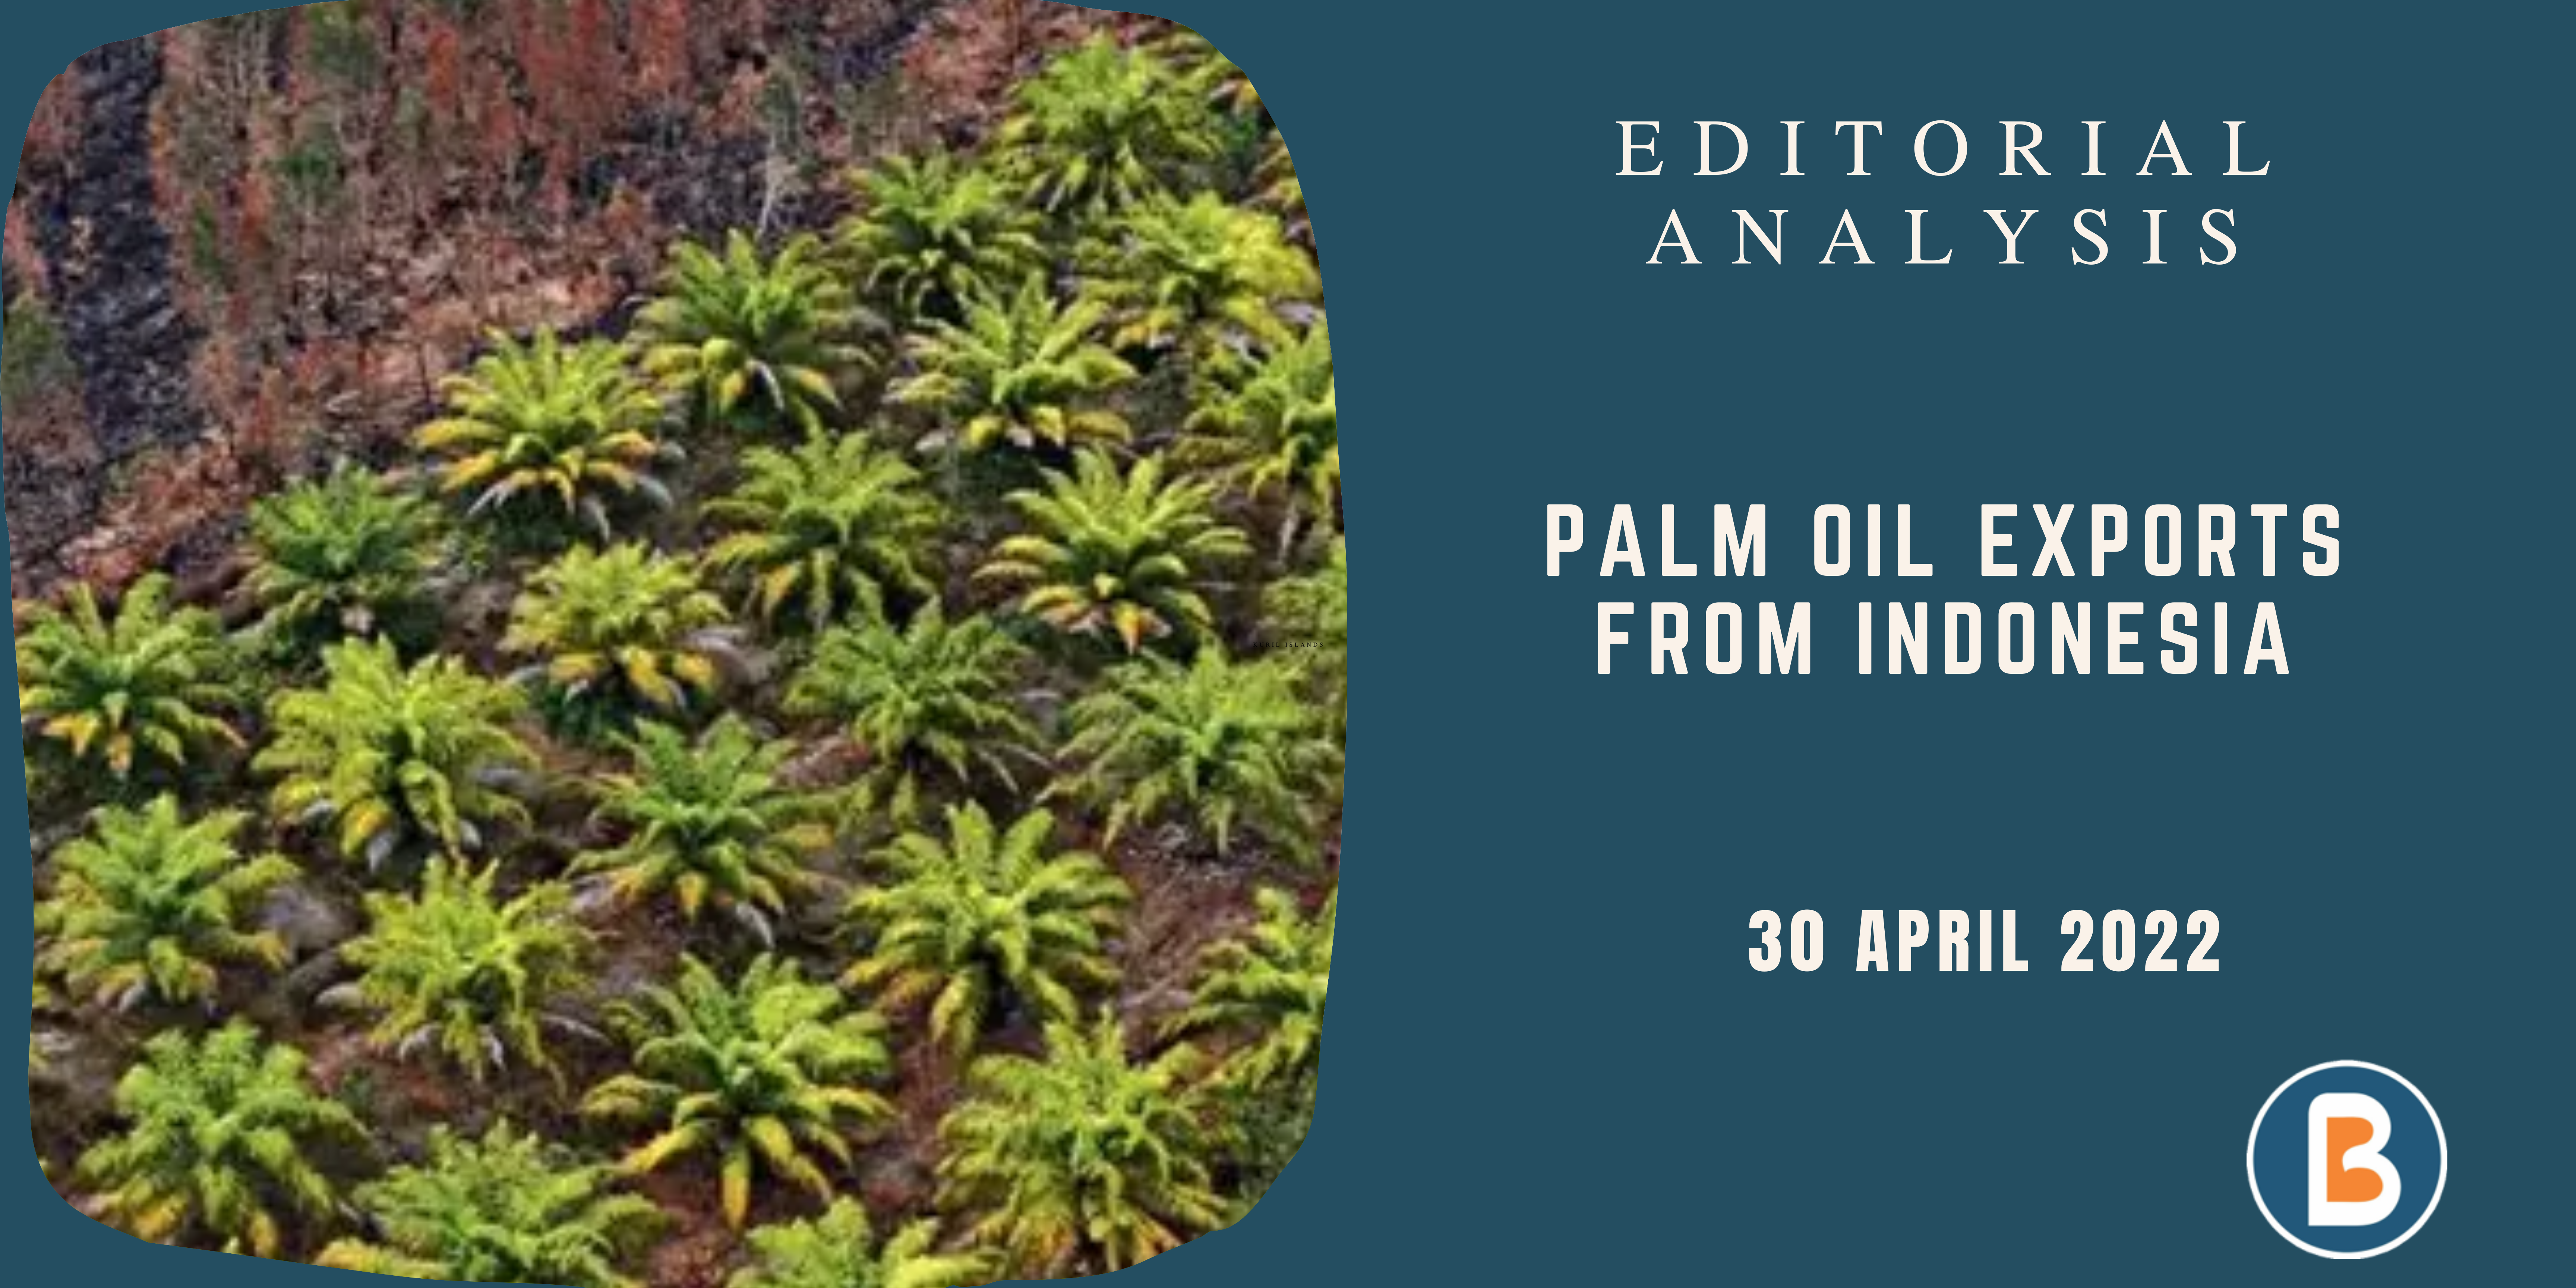 Editorial Analysis for IAS - Palm Oil Exports from Indonesia